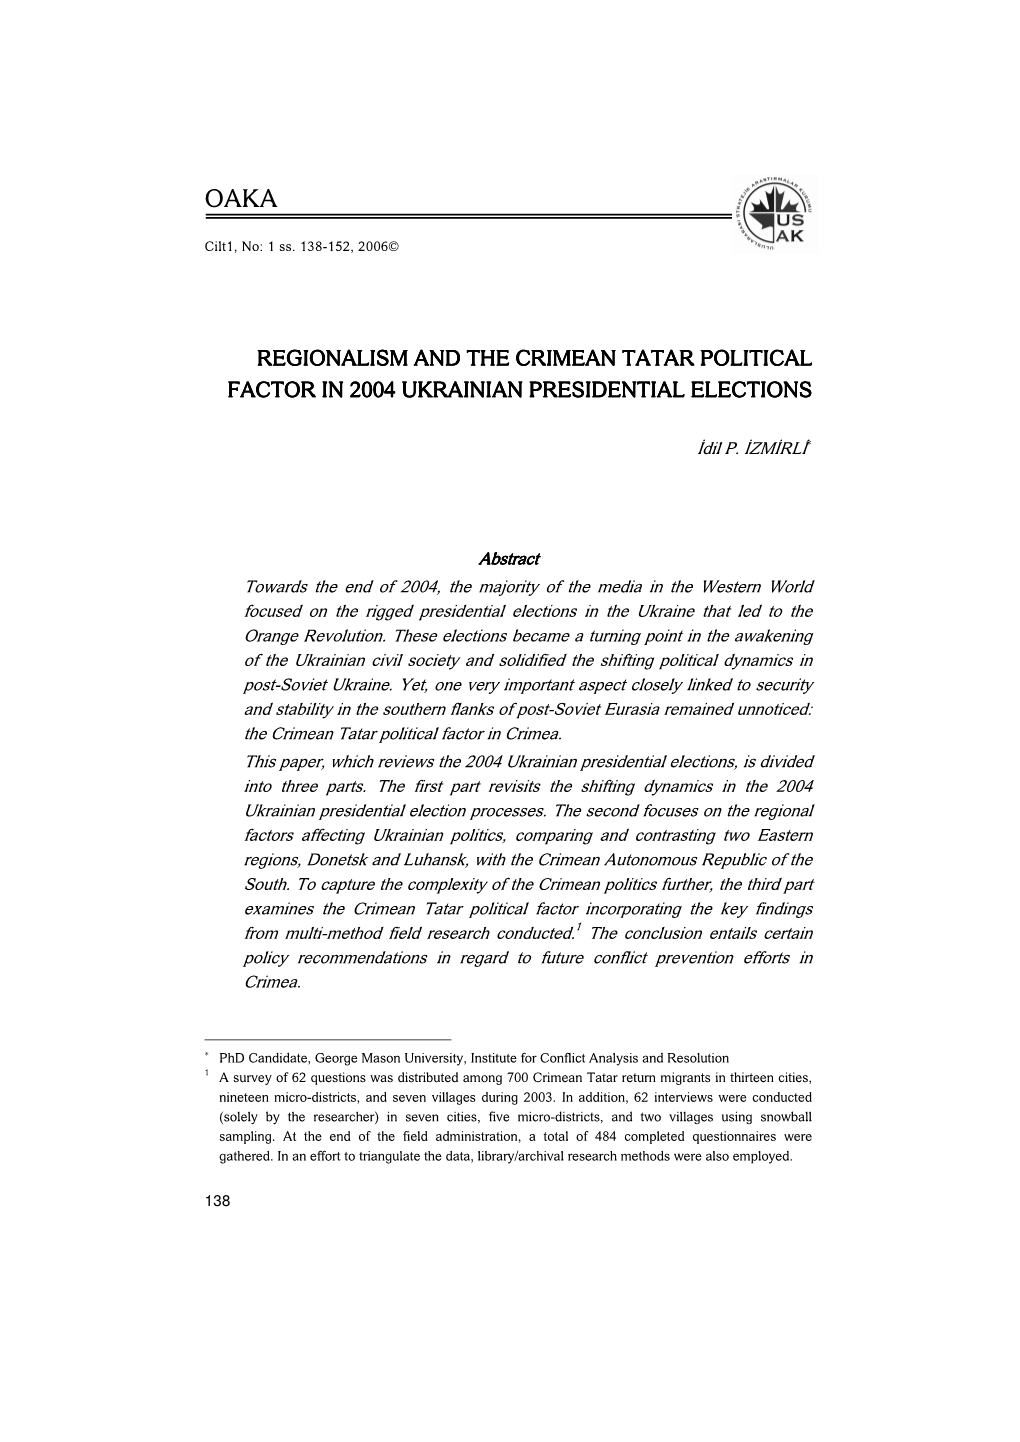 Regionalism and the Crimean Tatar Political Factor in 2004 Ukrainian Presidential Elections